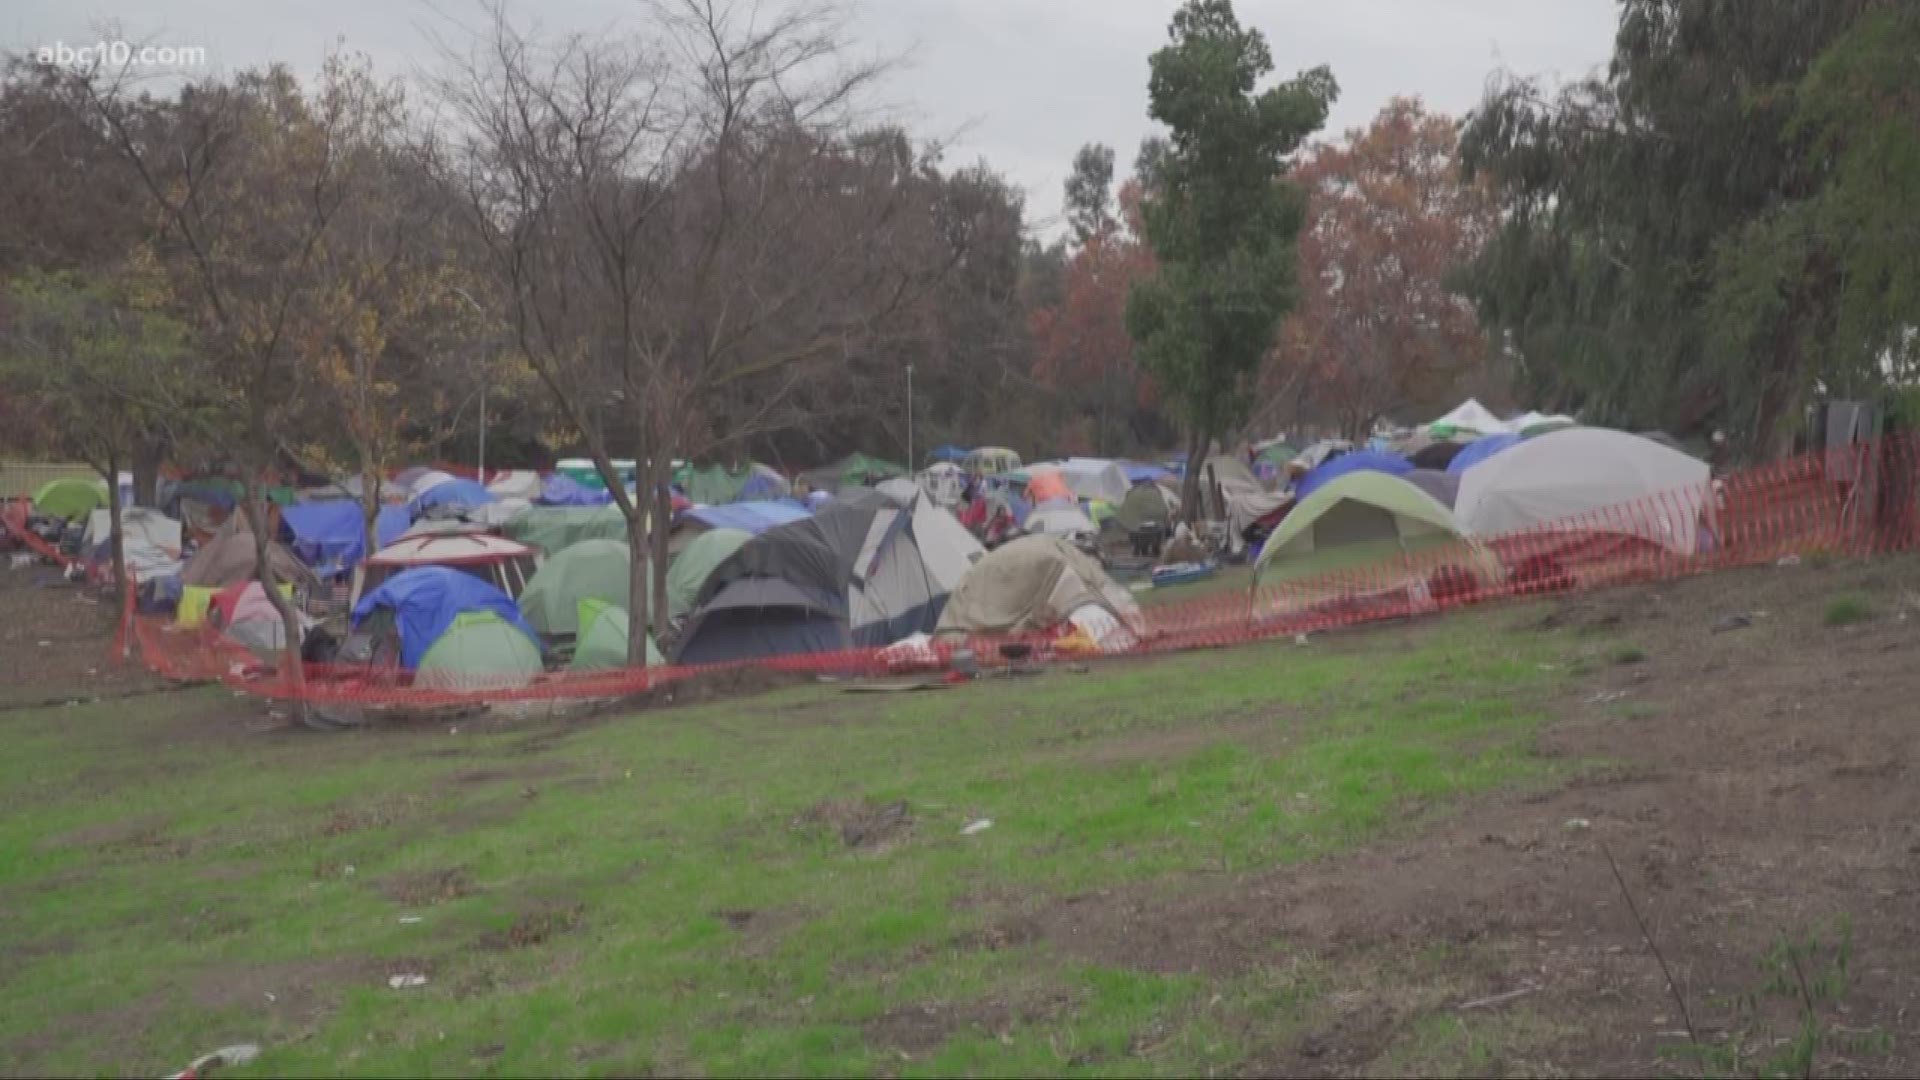 The City of Modesto says well over 400 people are living at Beard Brook Park since the city opened the temporary encampment in September. That includes roughly 250 tents.